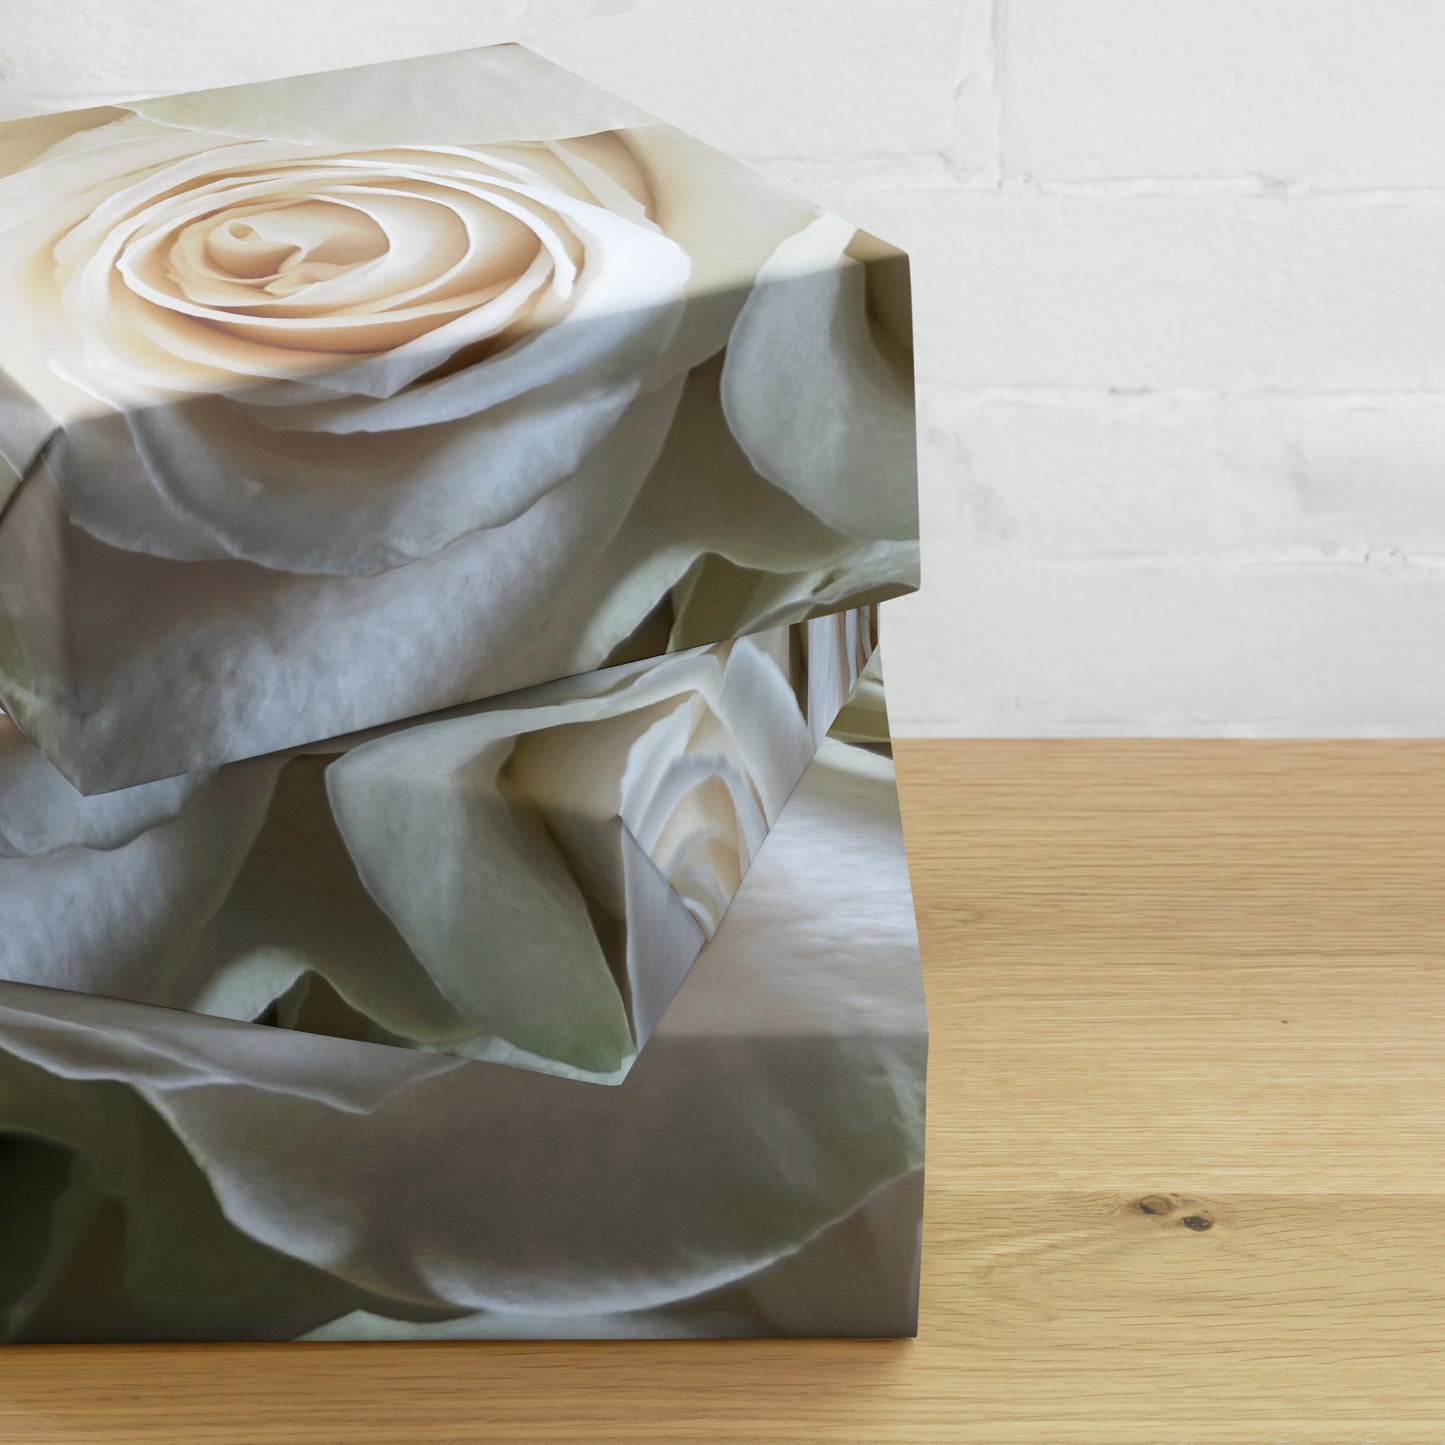 White Roses Wrapping paper sheets